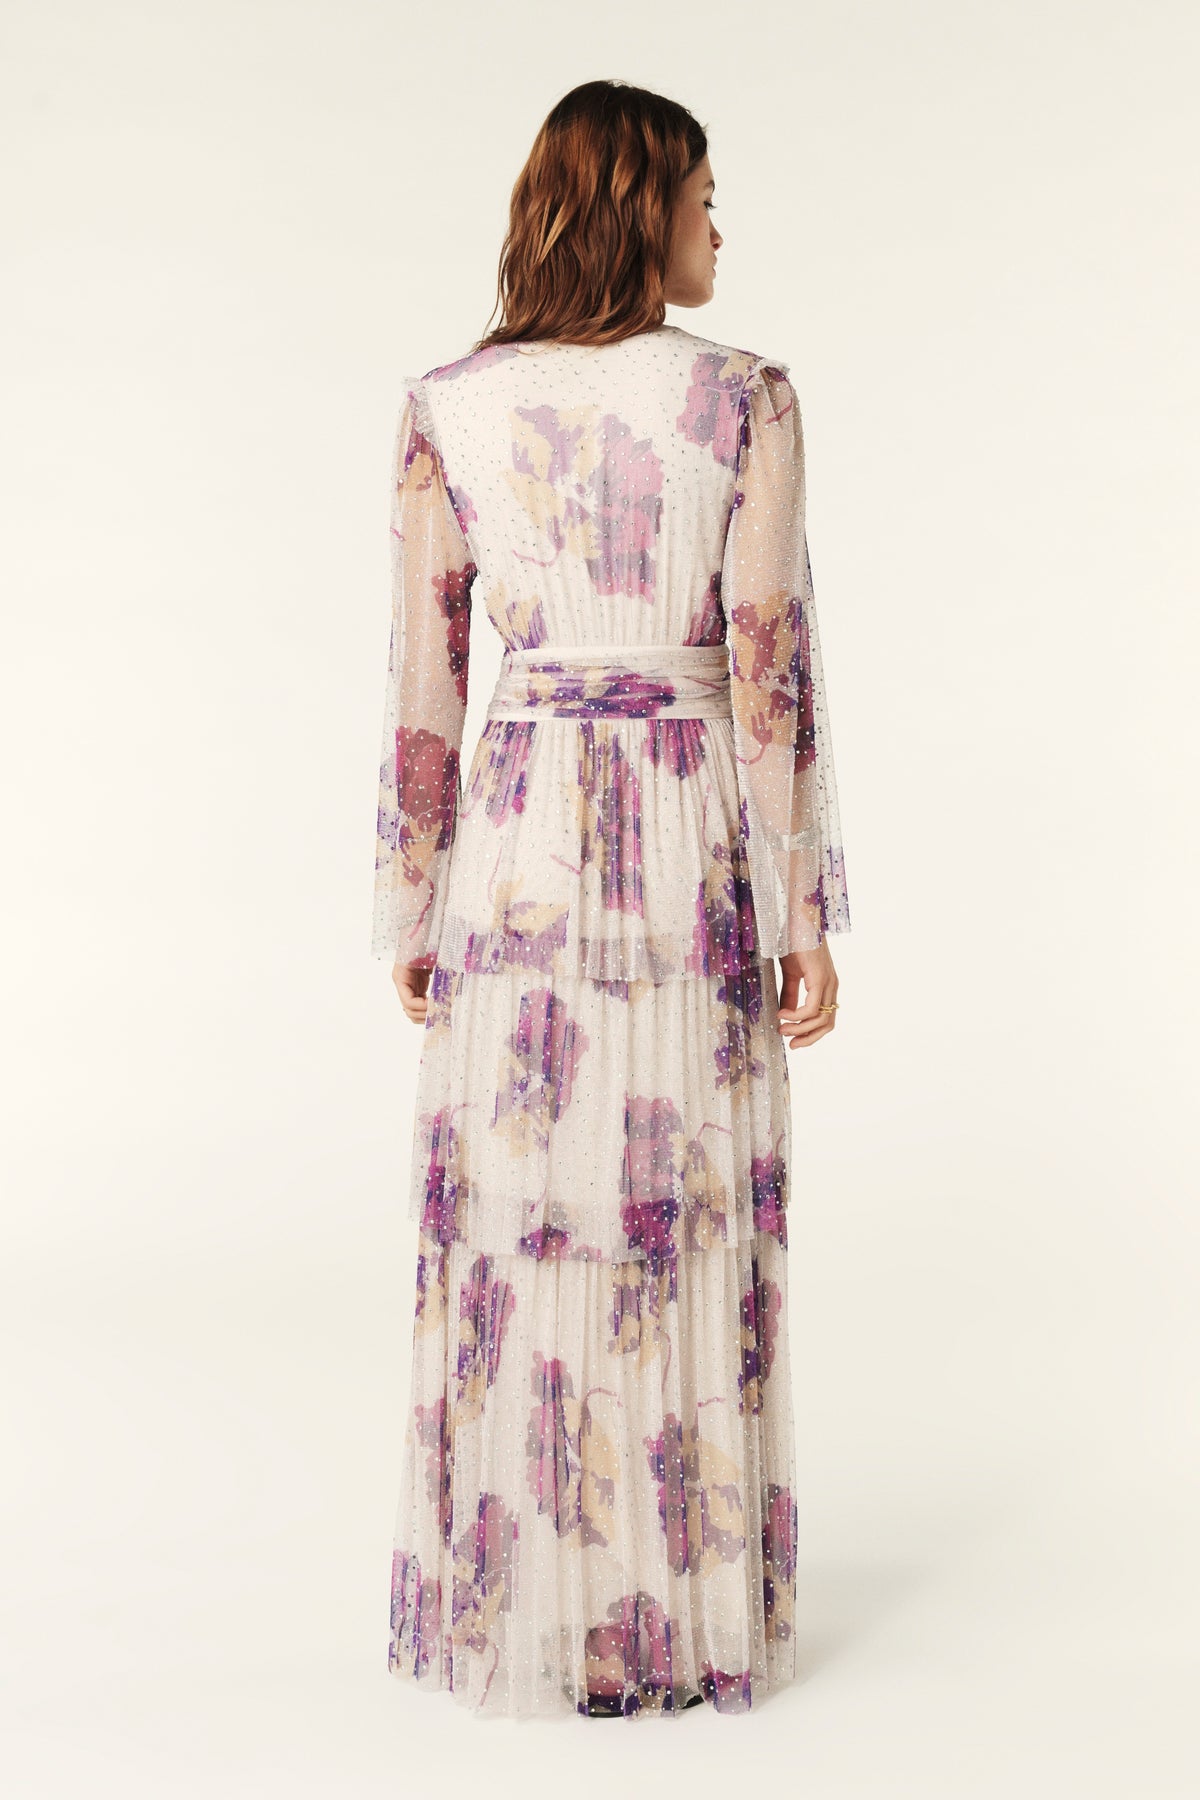 Ecru V neck maxi dress with fluted sheer sleeves empire line and purple floral design with net overlay with iridescent gems all over